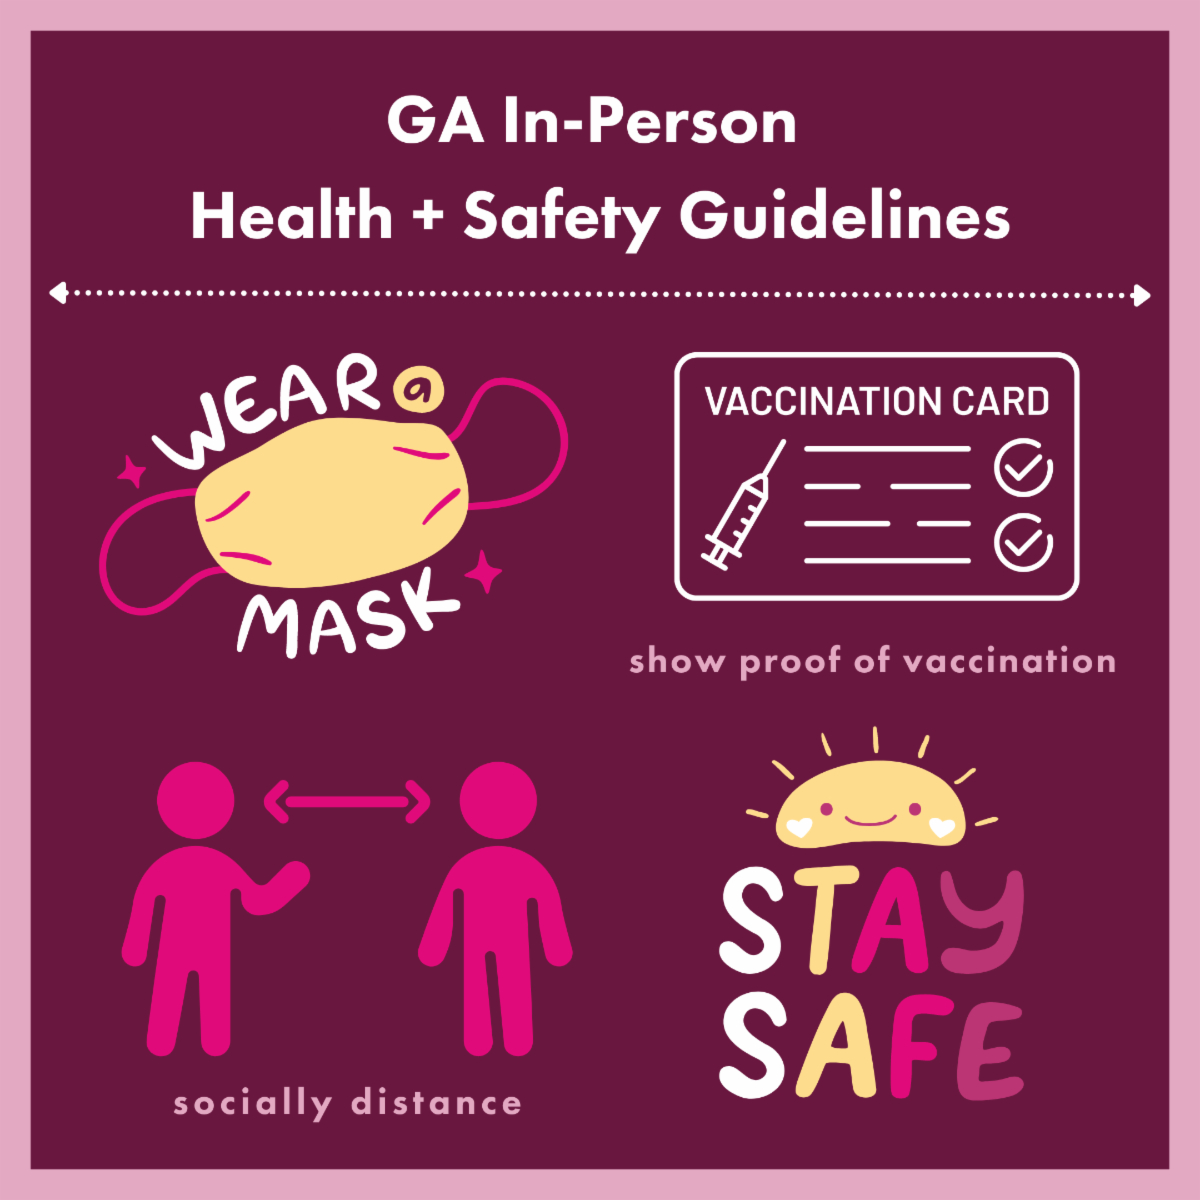 GA In-person Health and Safety Guidelines - wear a mask - show proof of vaccination - socially distance - stay safe